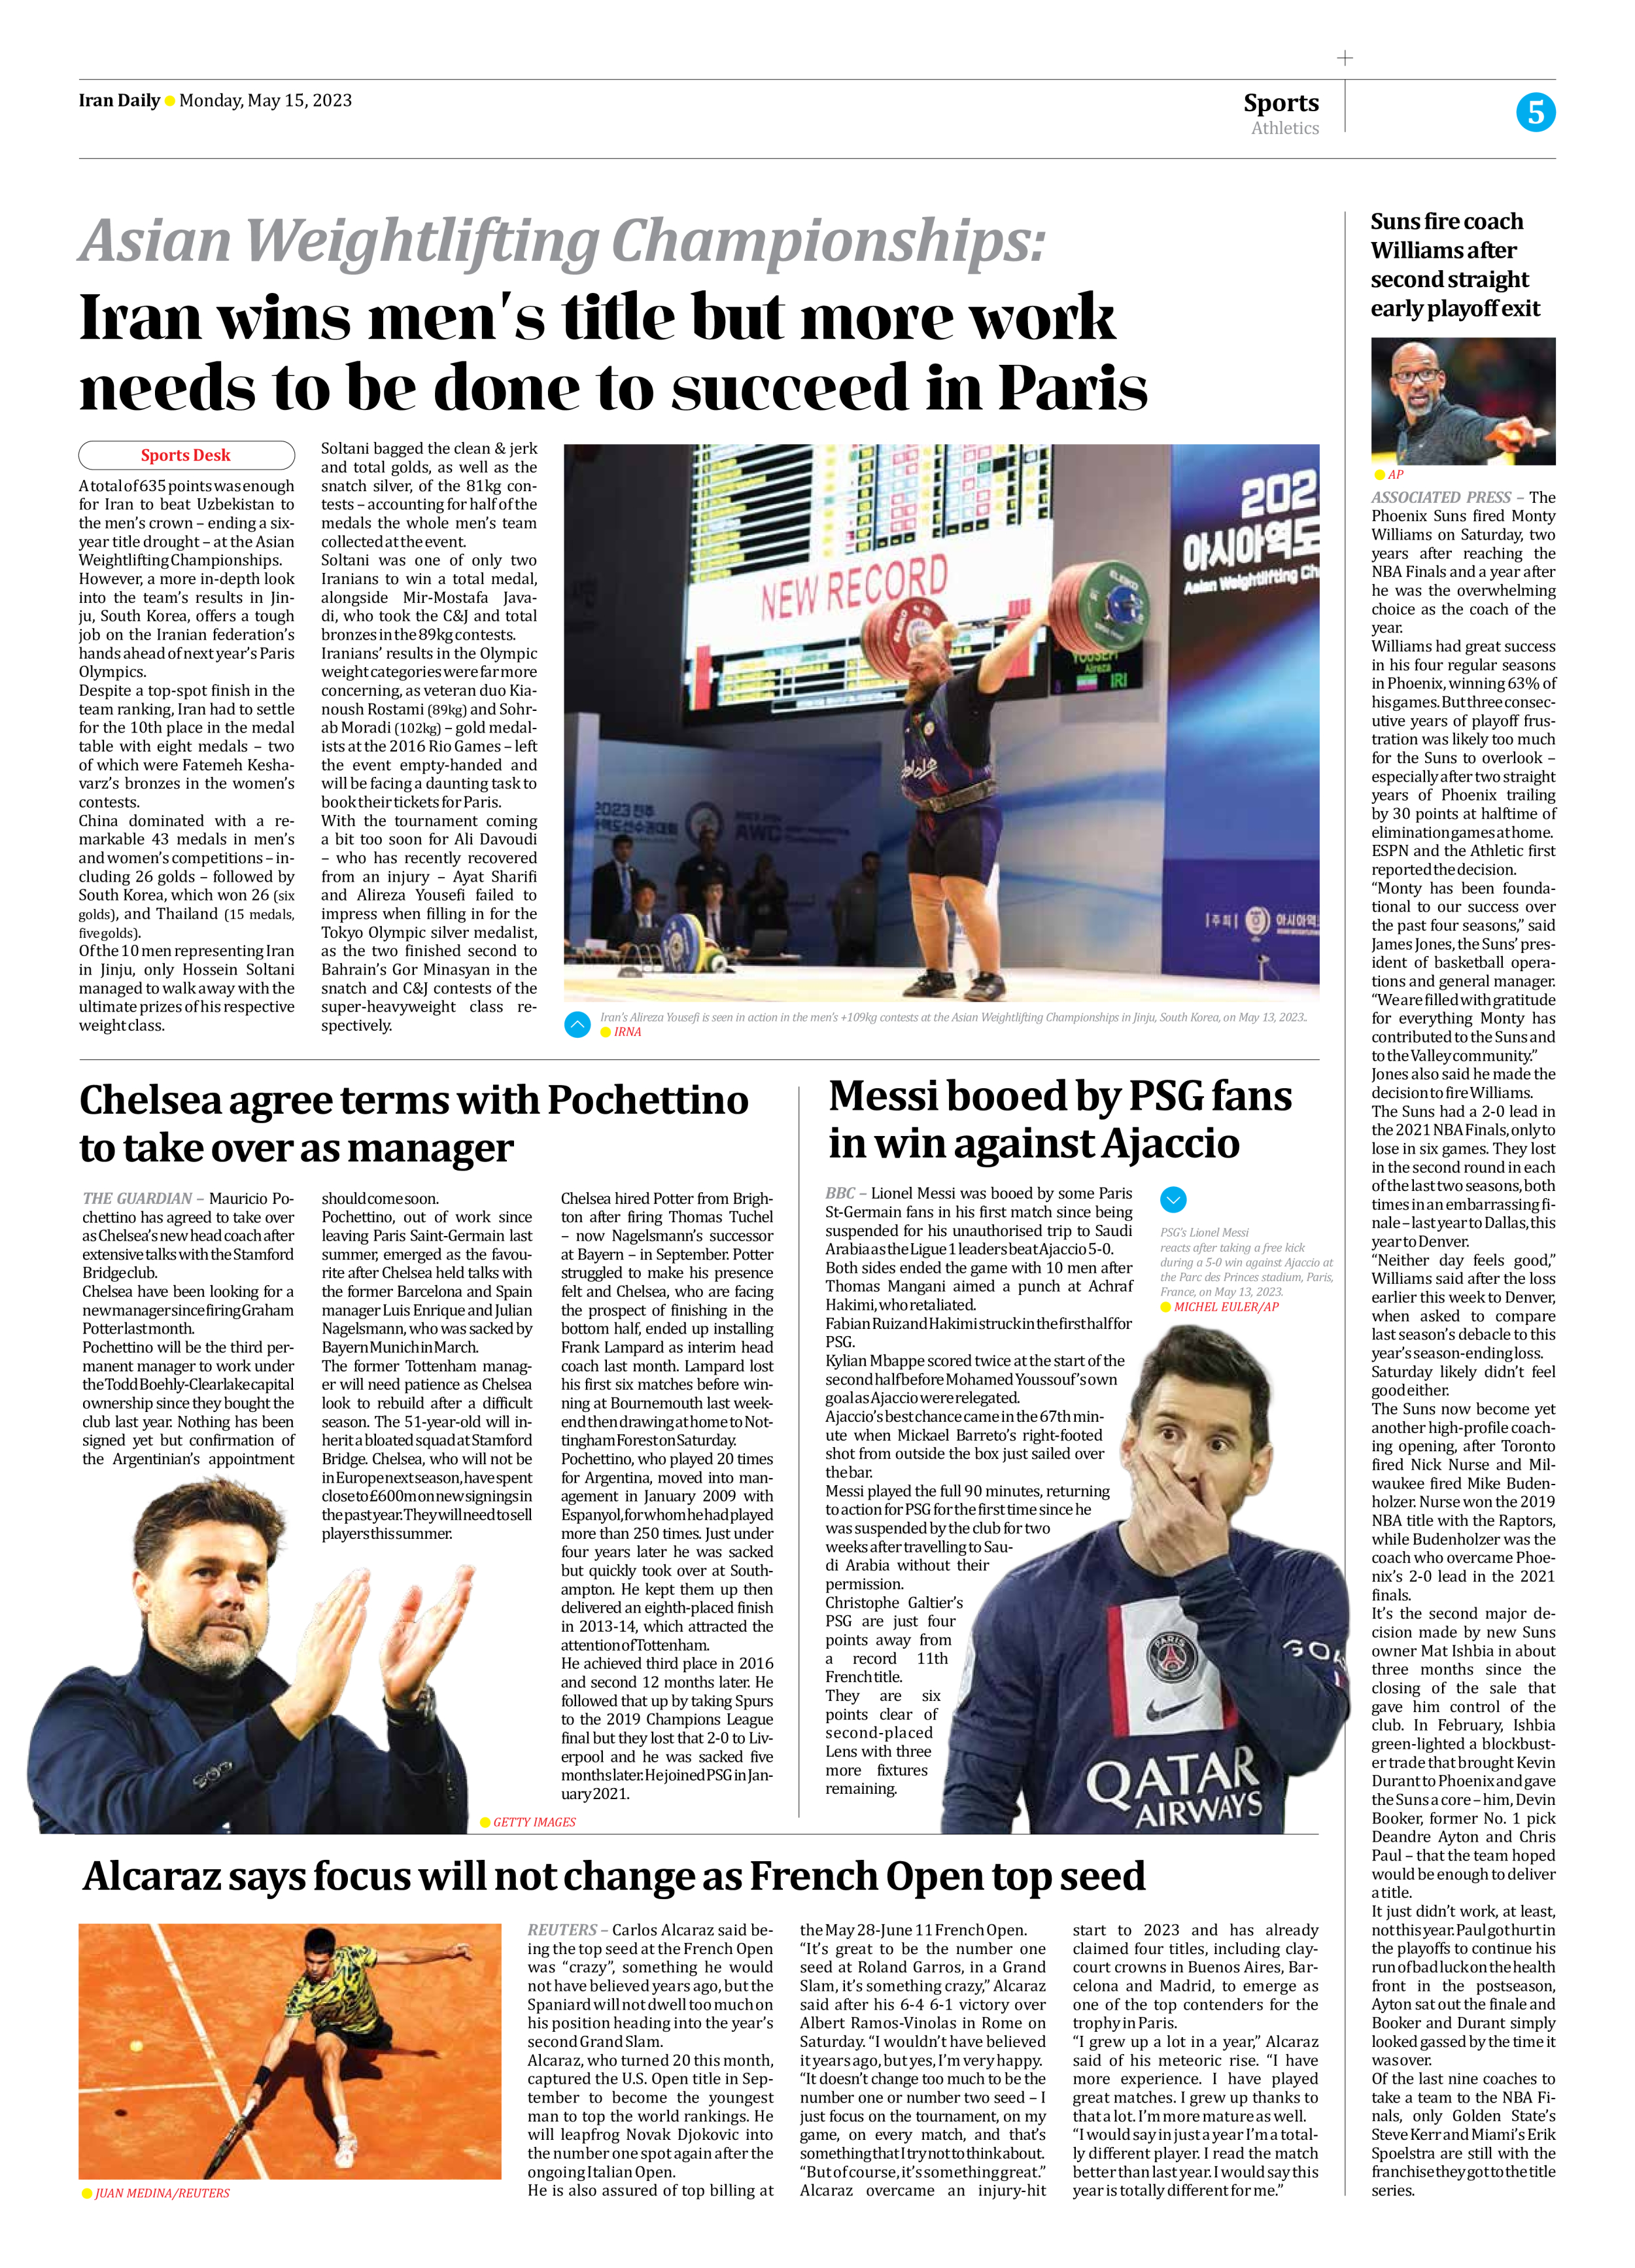 Iran Daily - Number Seven Thousand Two Hundred and Ninety Two - 15 May 2023 - Page 5